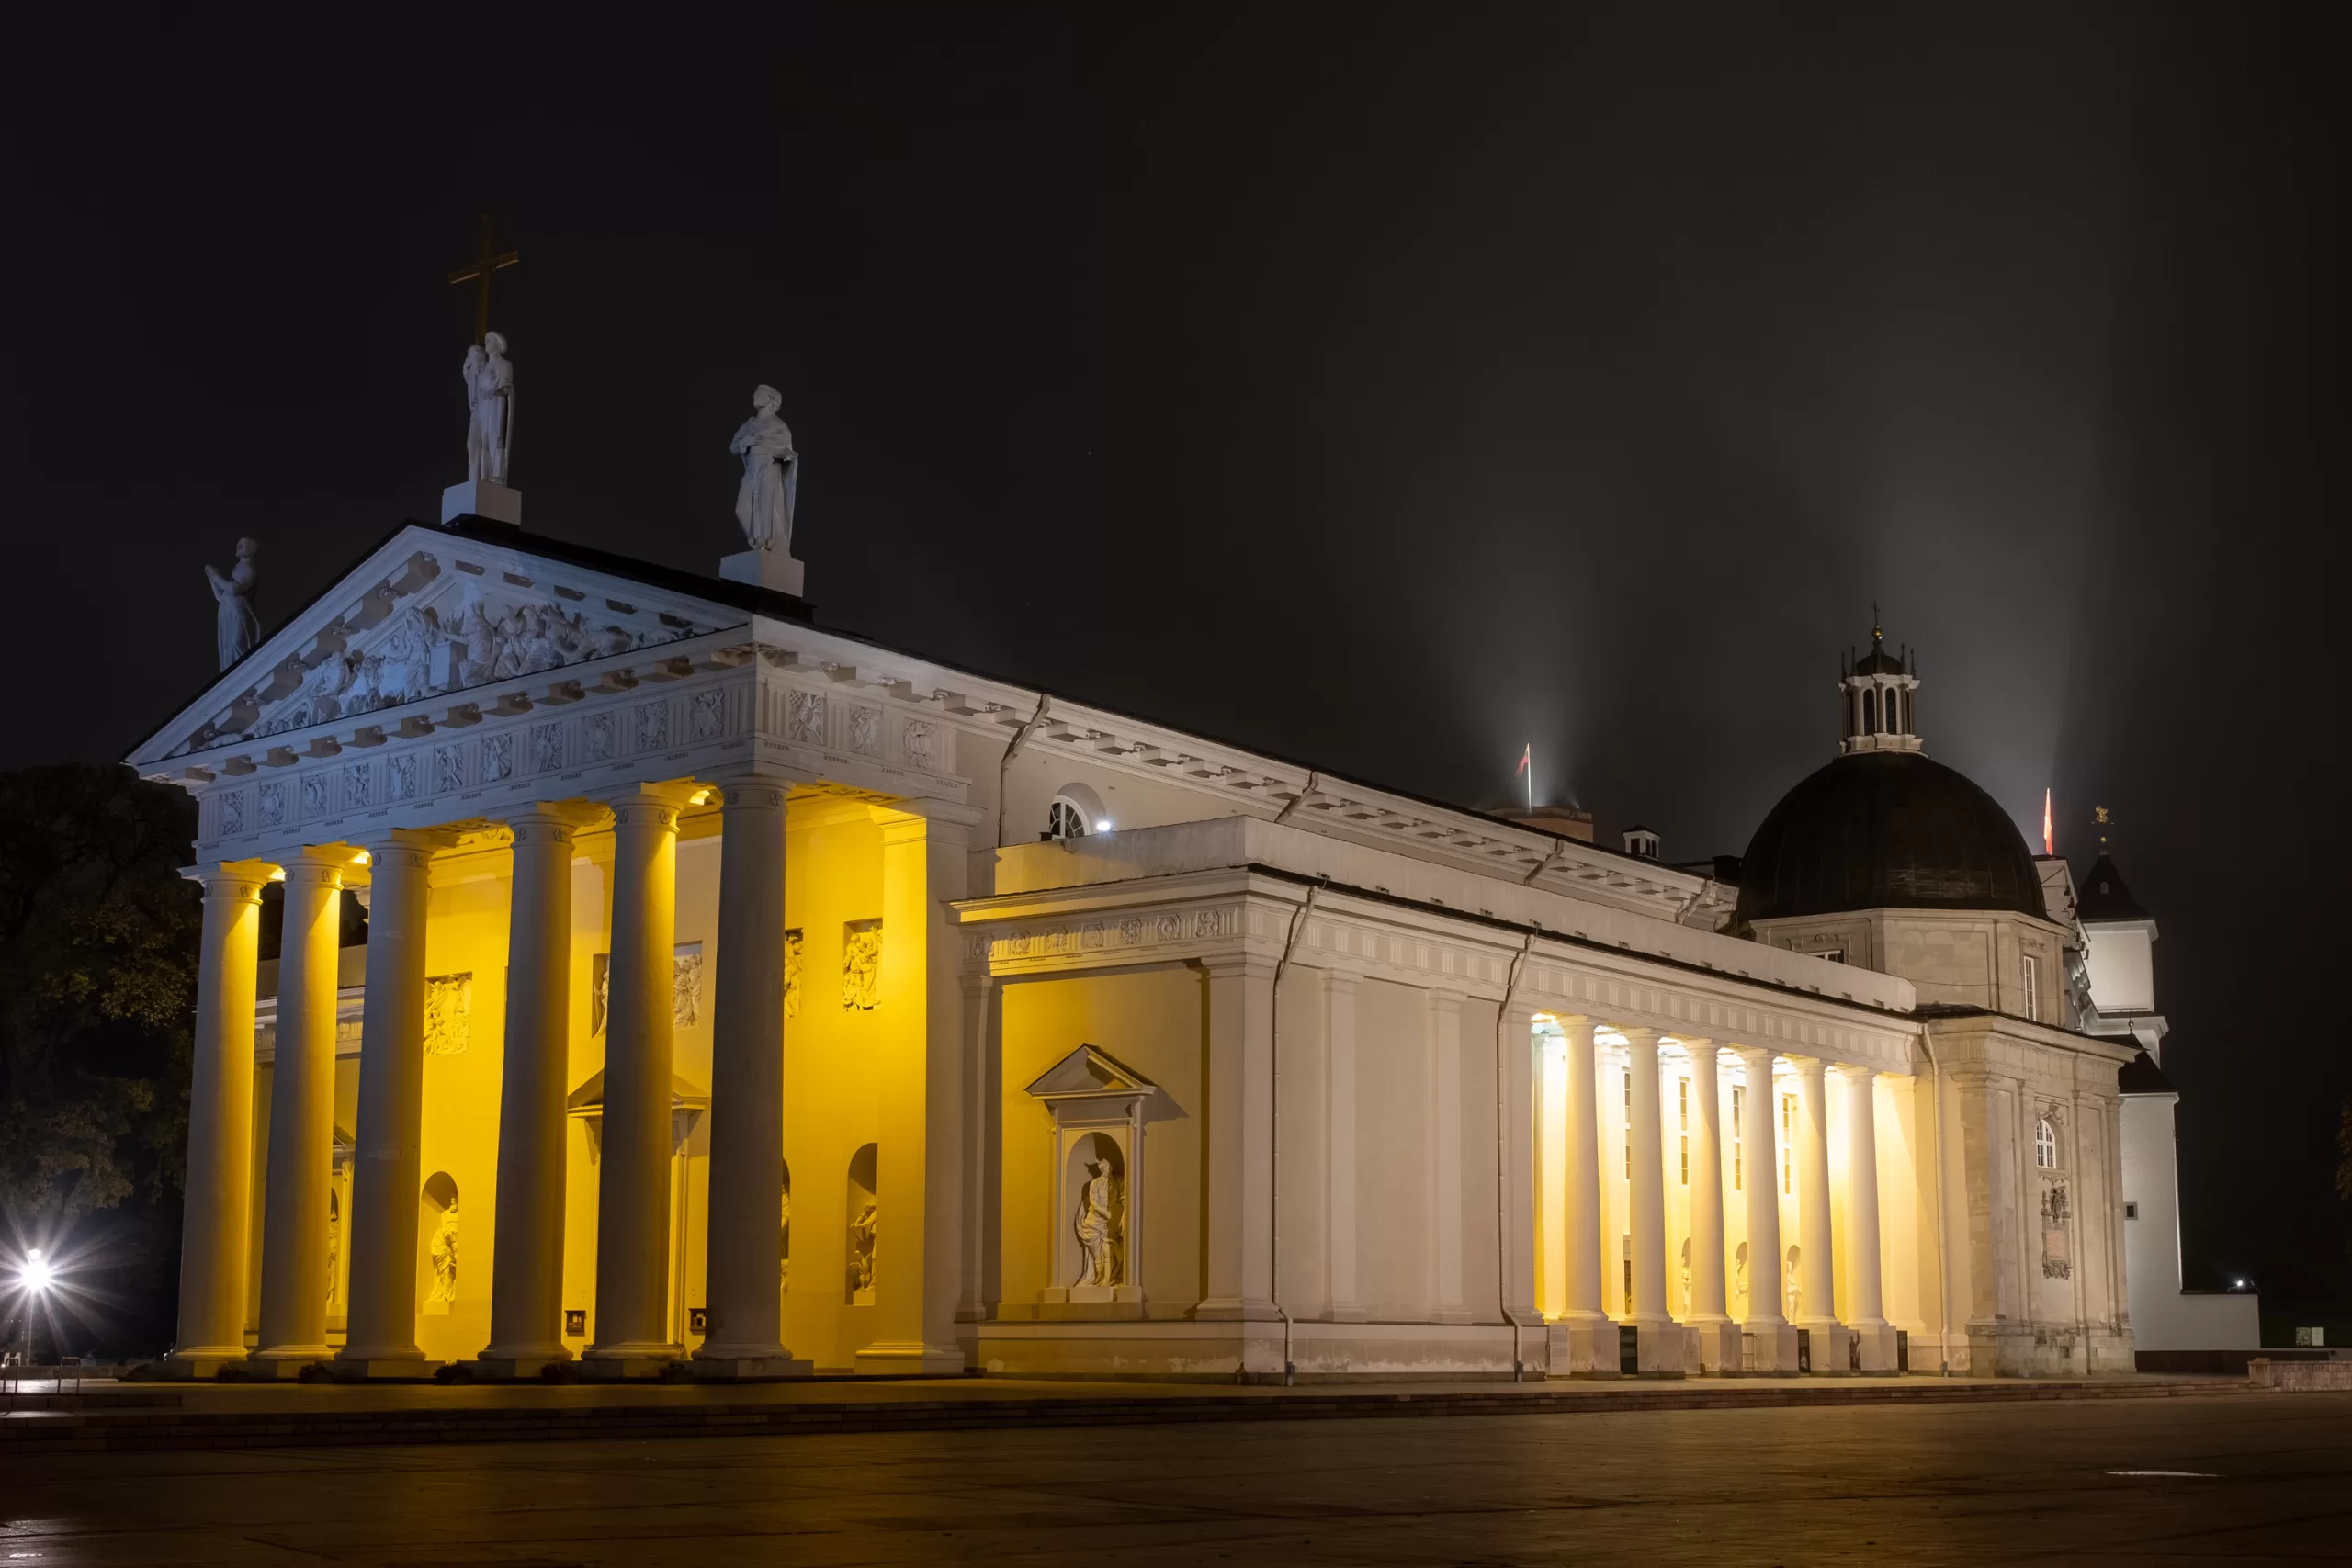 Nighttime photo of Vilnius Cathedral with lights and a dark sky.